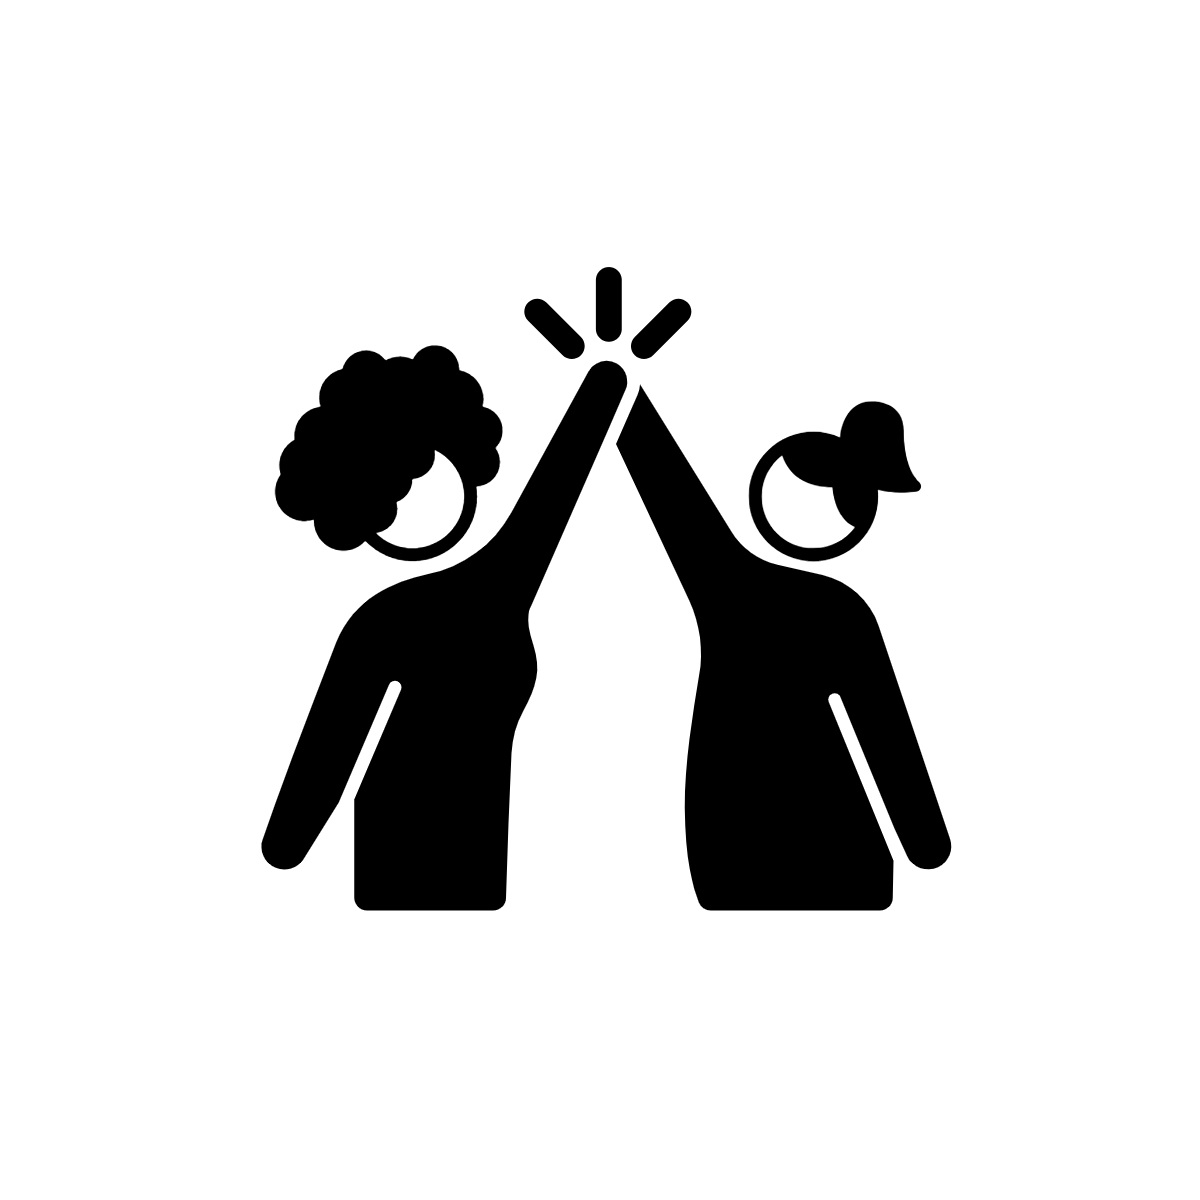 Drawing of two women high-fiving